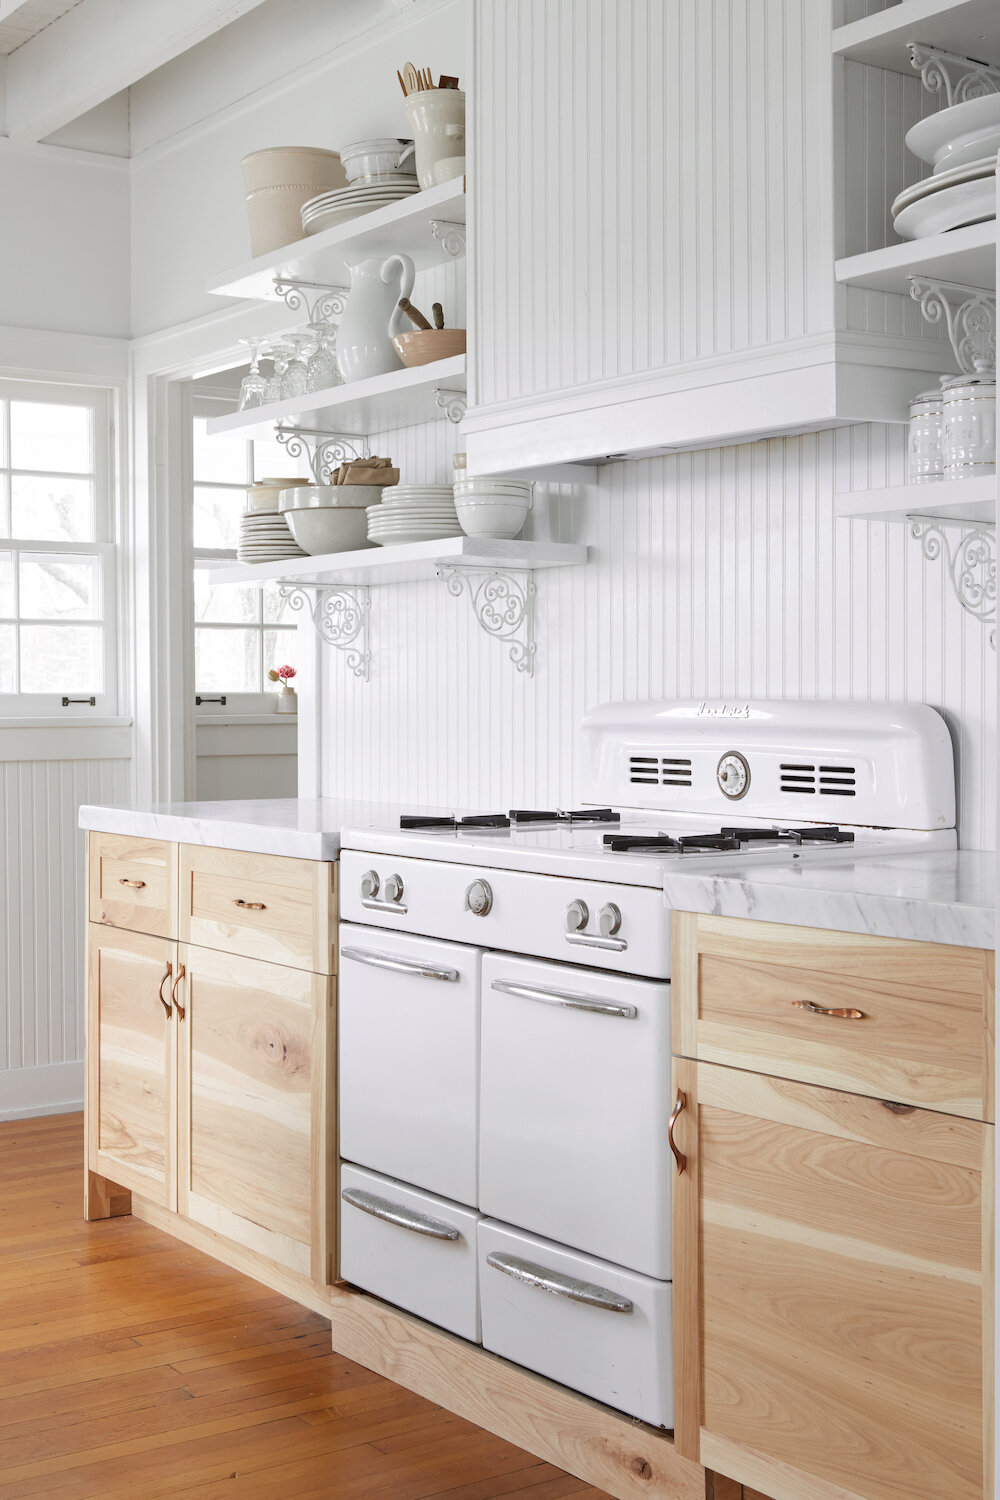 Leanne Ford designed white kitchen (Rinaman project) painted Delicate White by PPG.